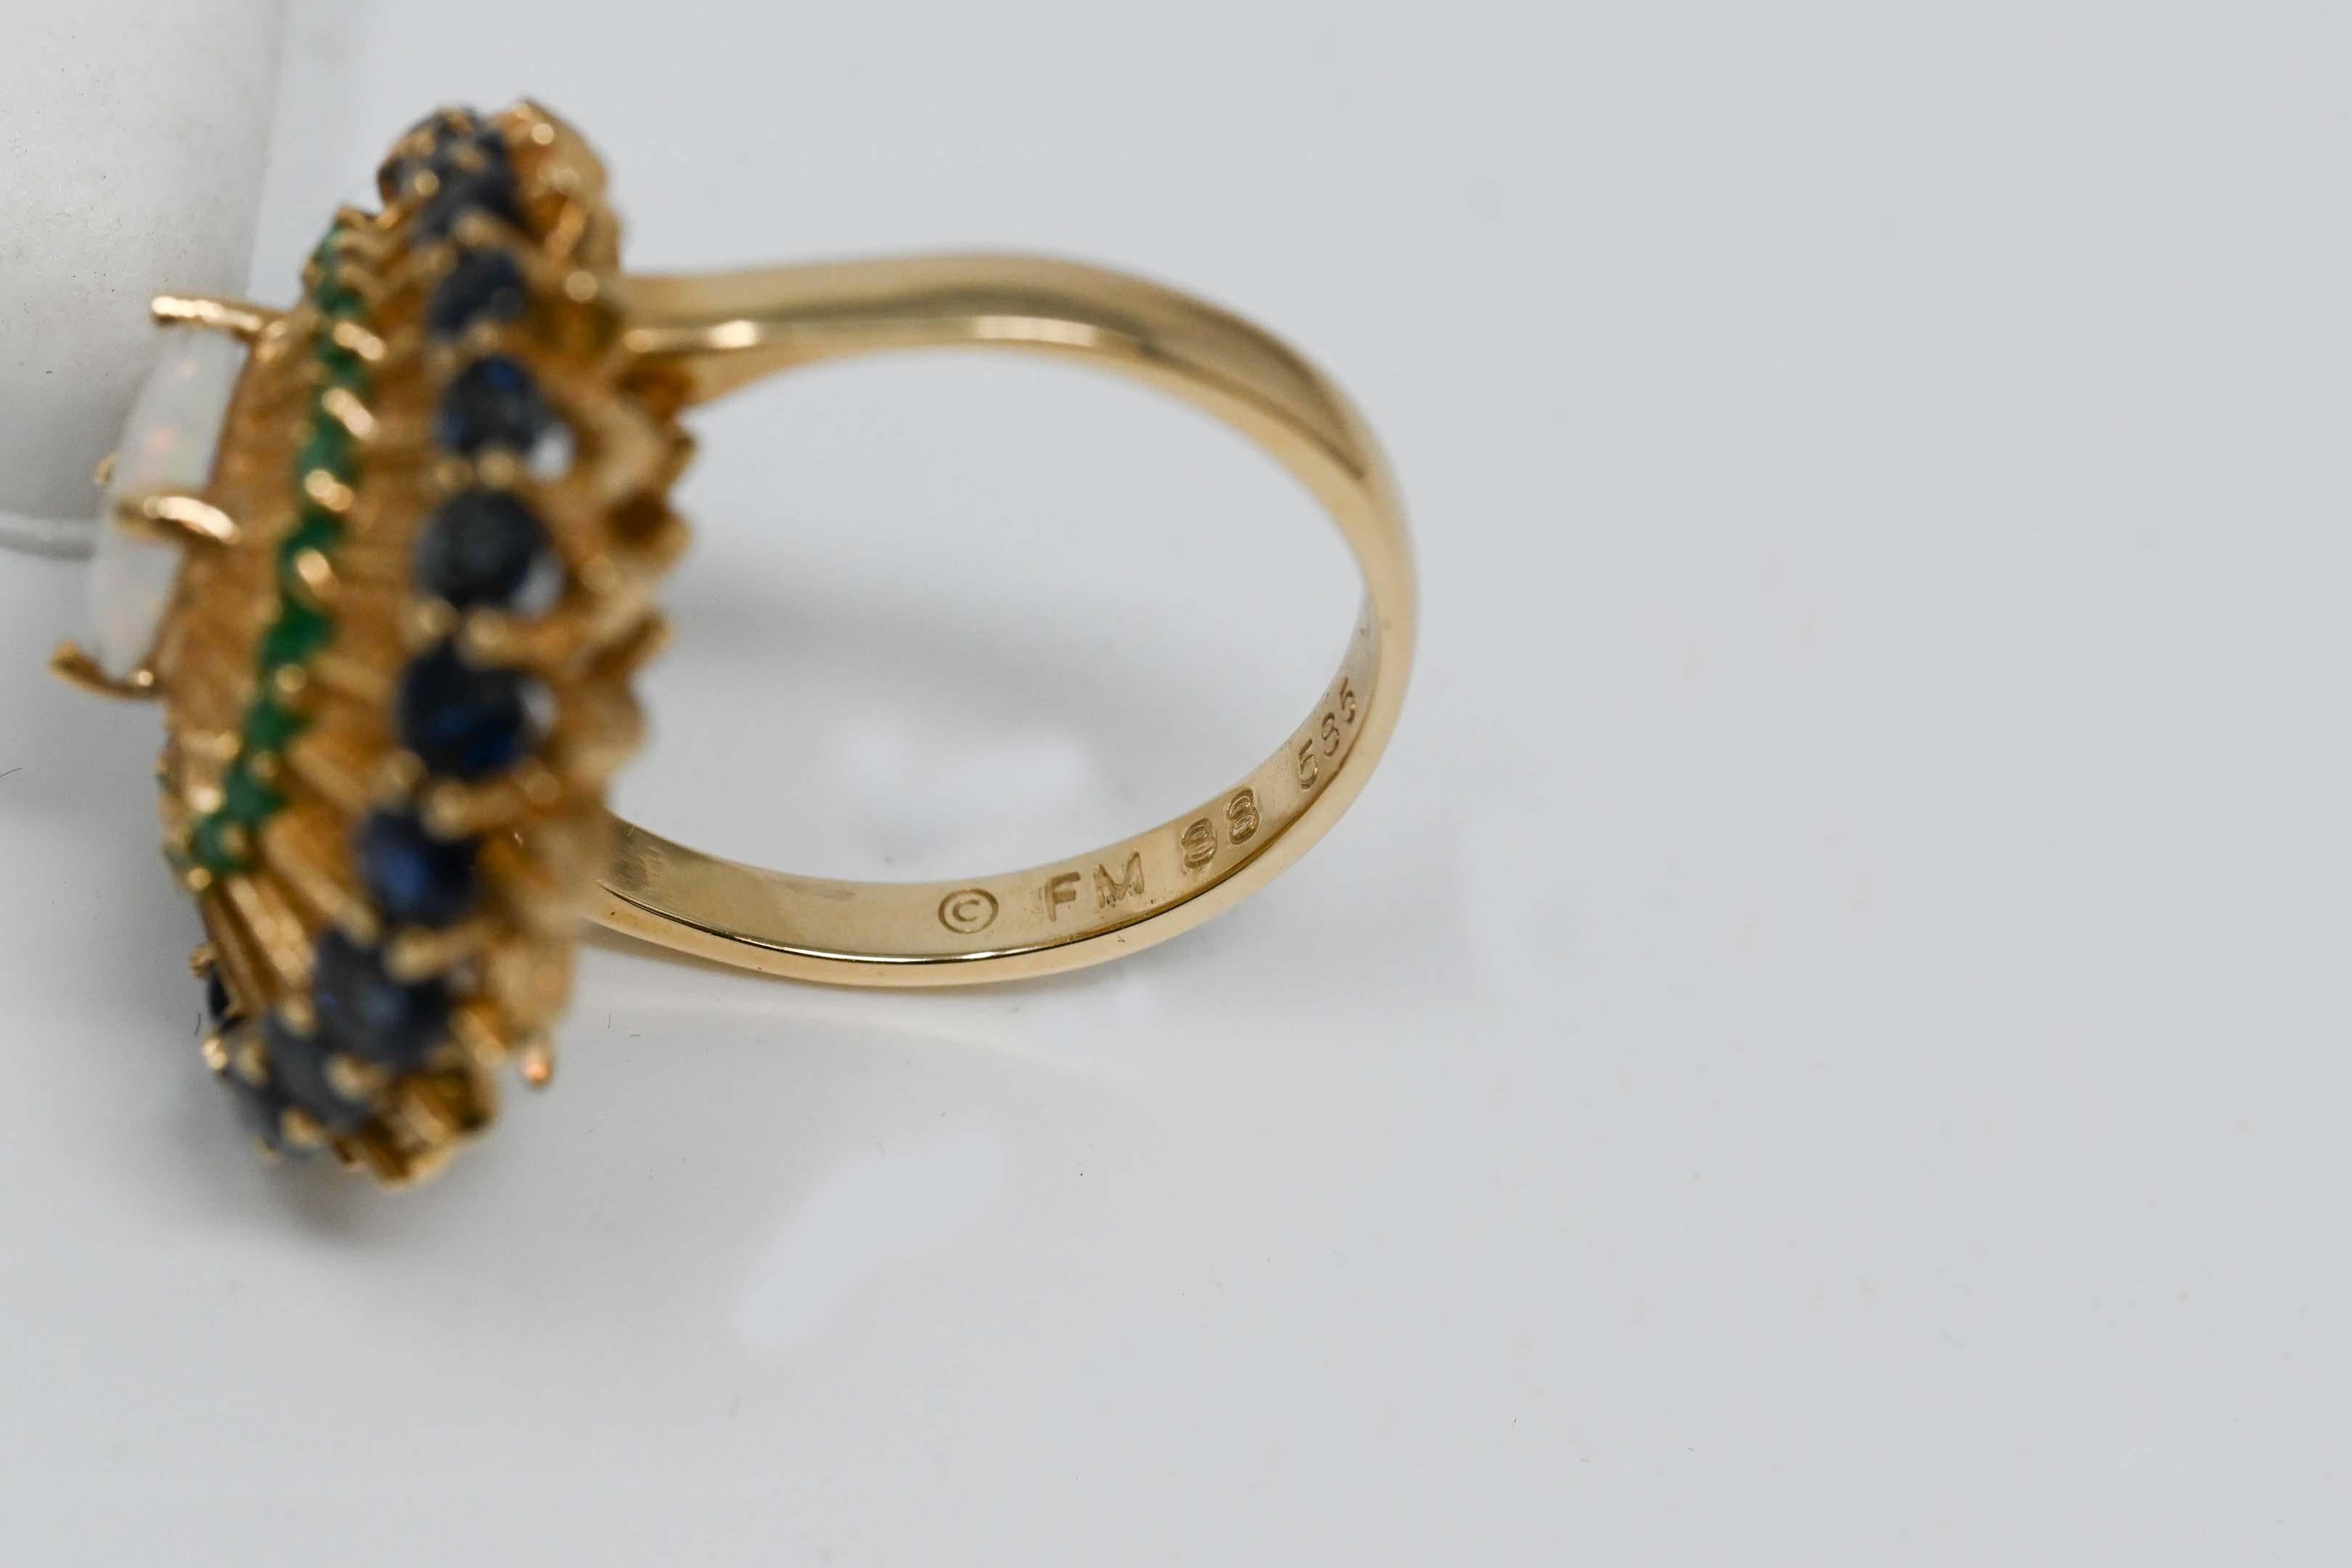 Franklin Mint 1988 14k Gold Peacock Design Ring In Good Condition For Sale In Montreal, QC